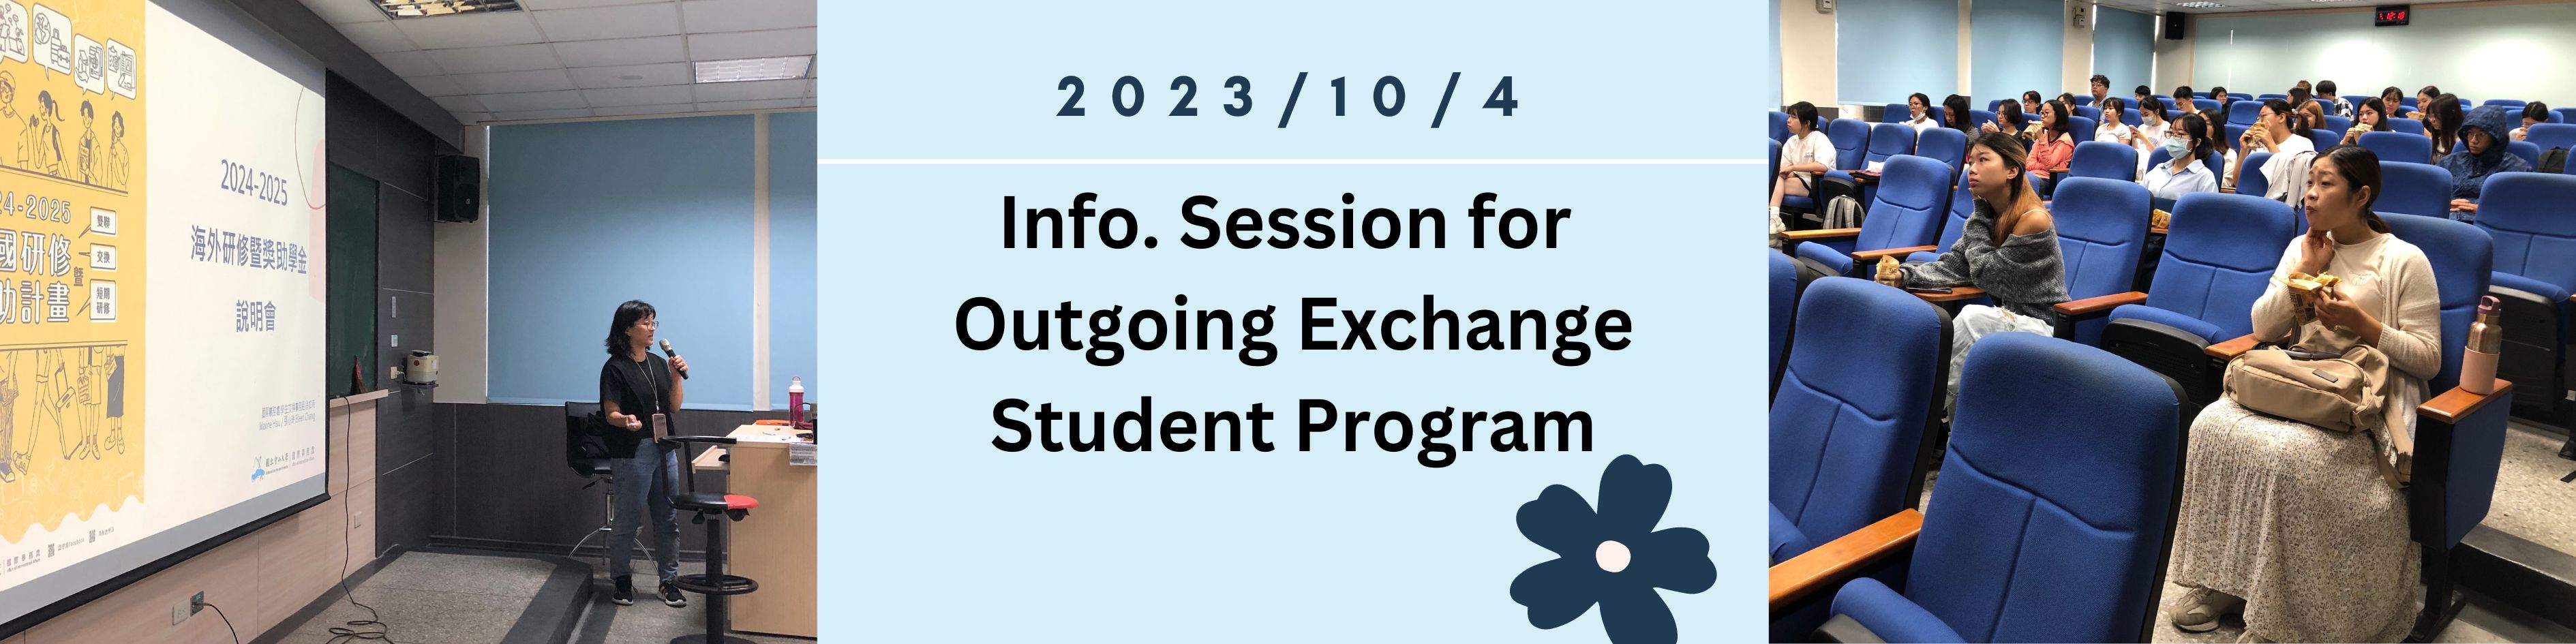 Info. Session for Outgoing Exchange Student Program